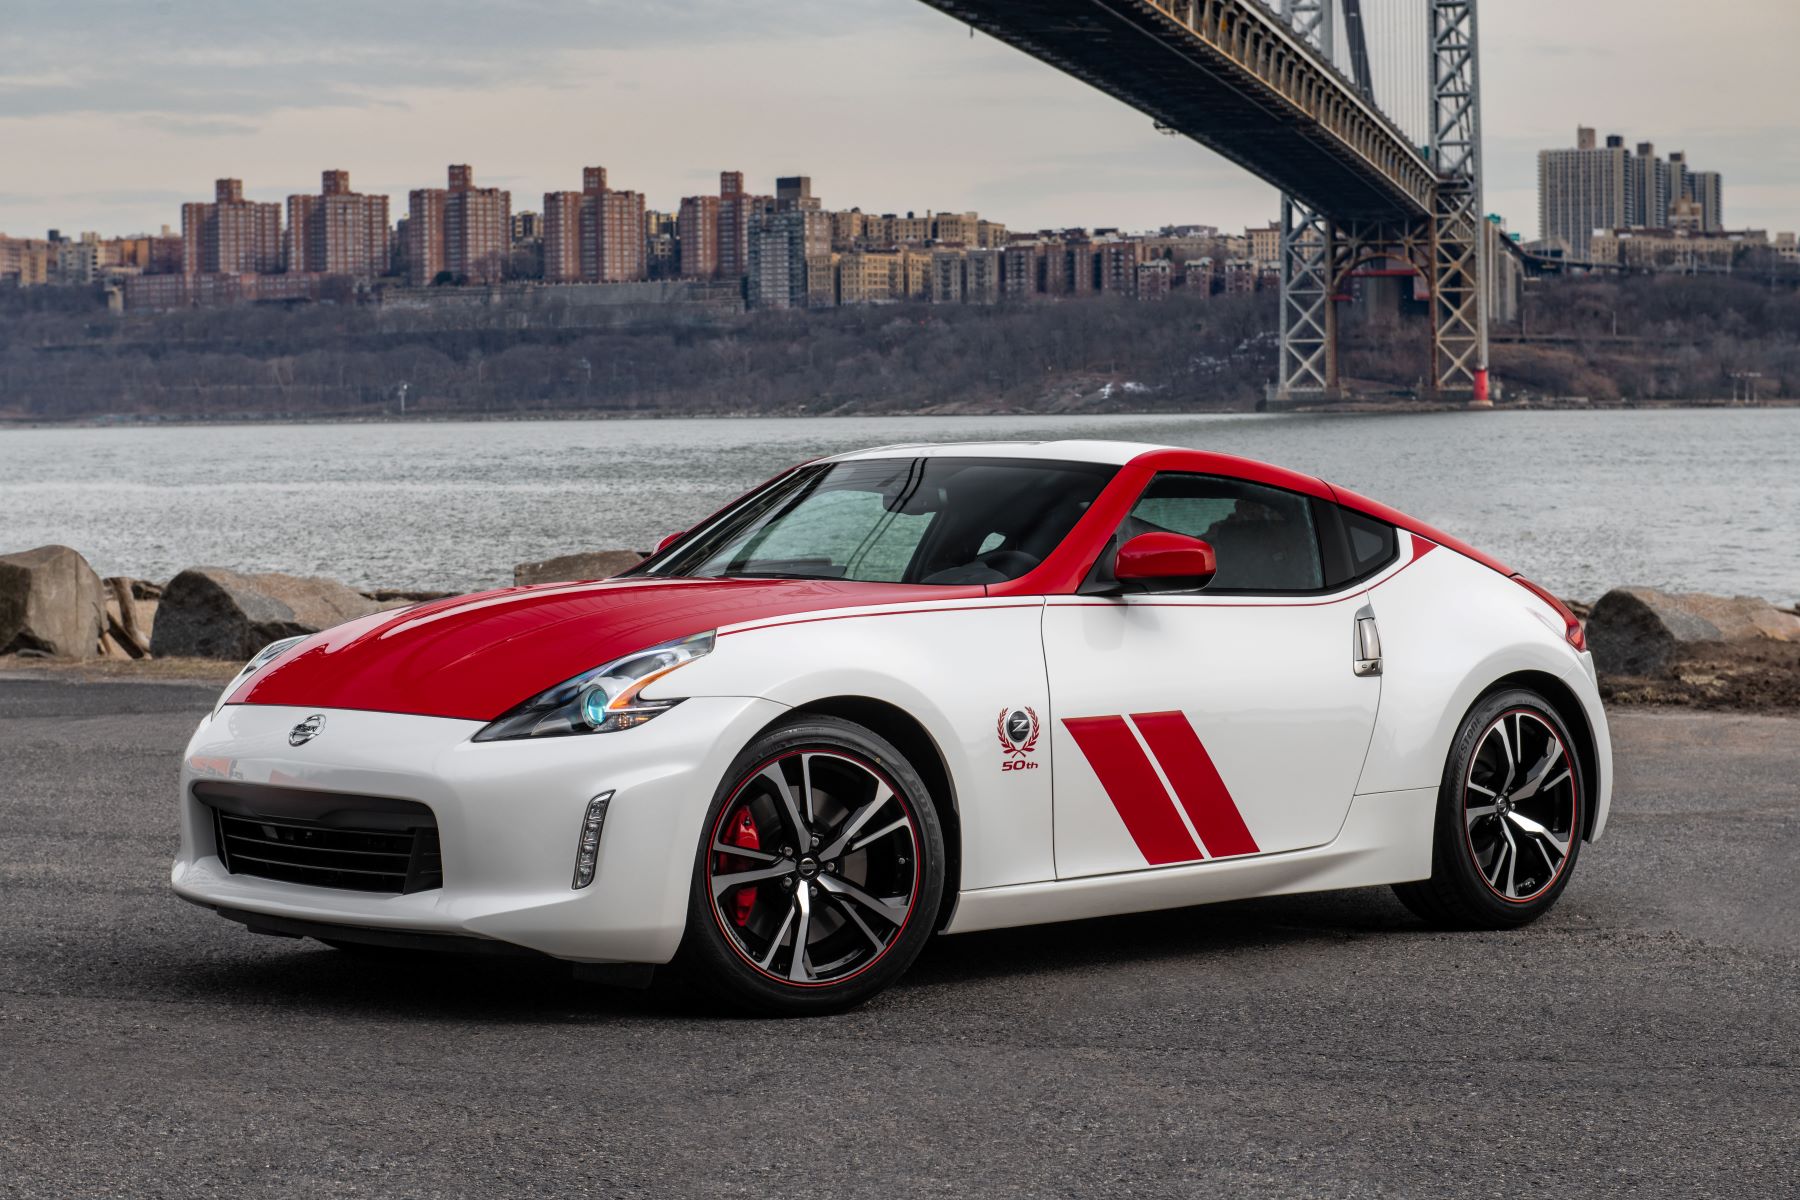 The 2020 Nissan 370Z 50th Anniversary Edition performance sports car model